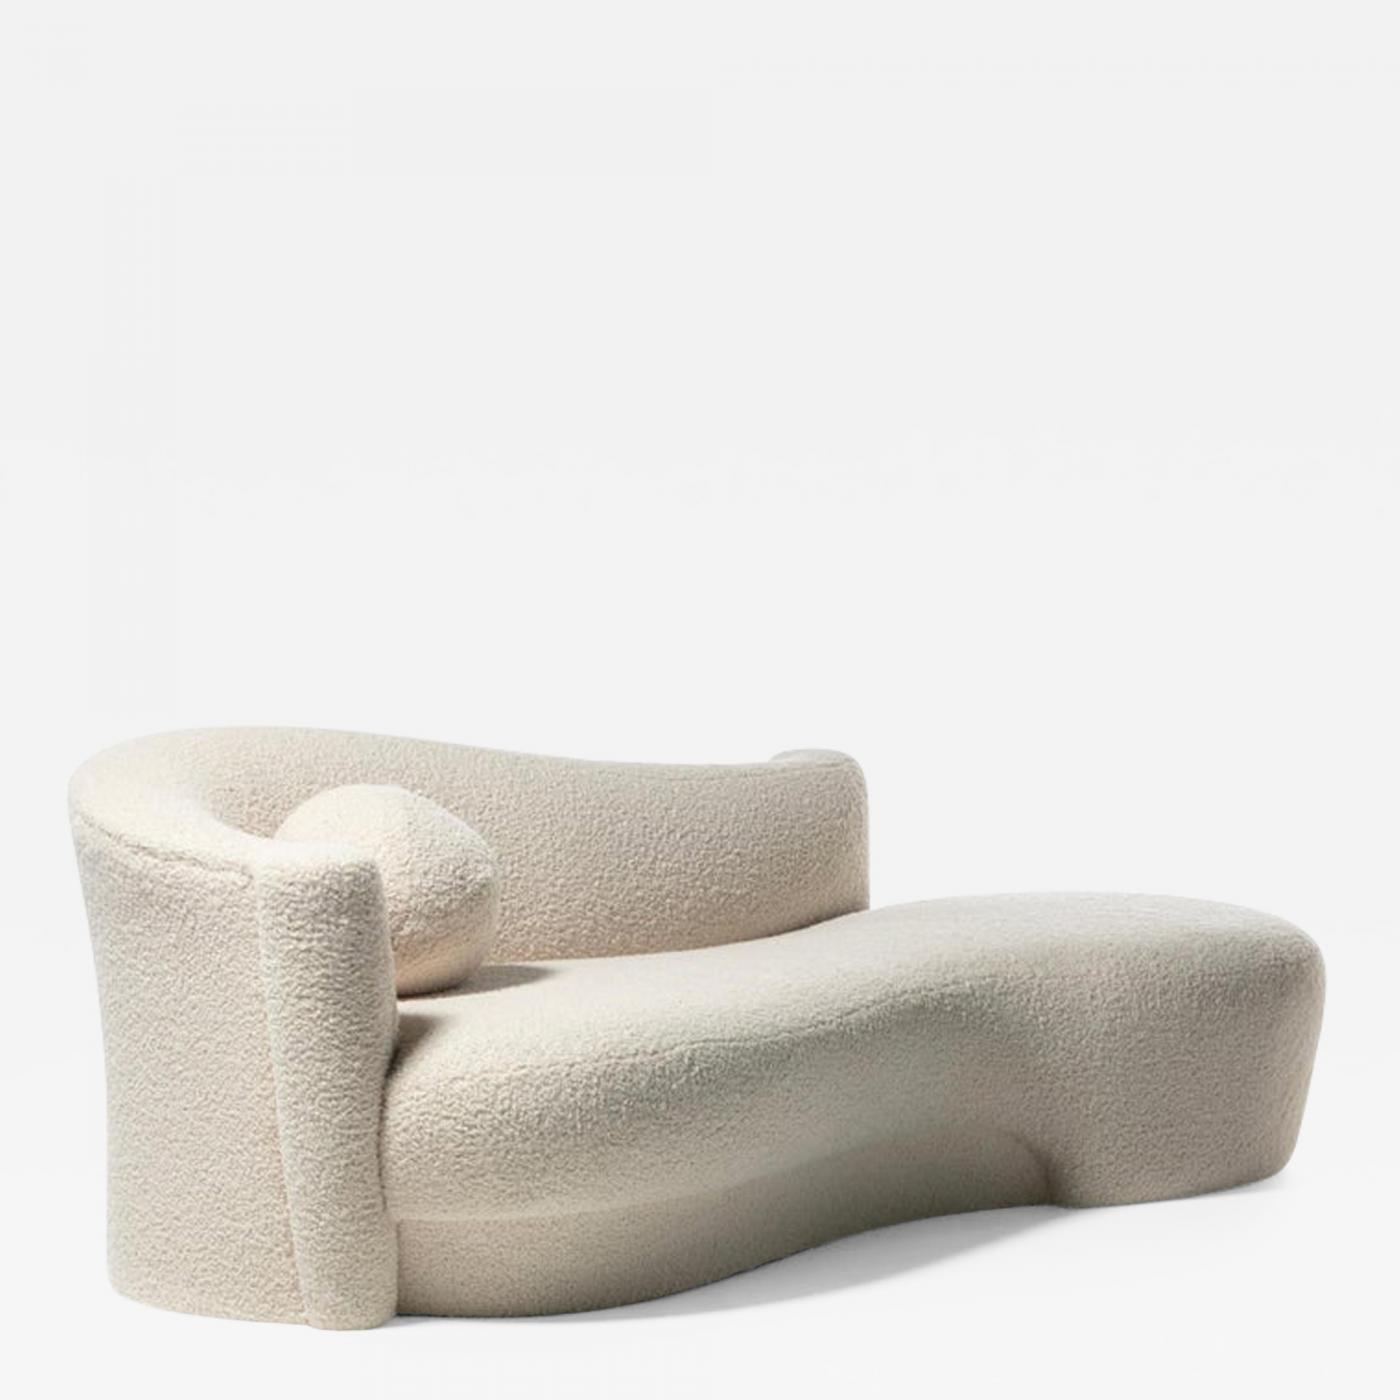 Weiman Sofa / Large Chaise in Supple Lux Ivory Bouclé, c. 1990